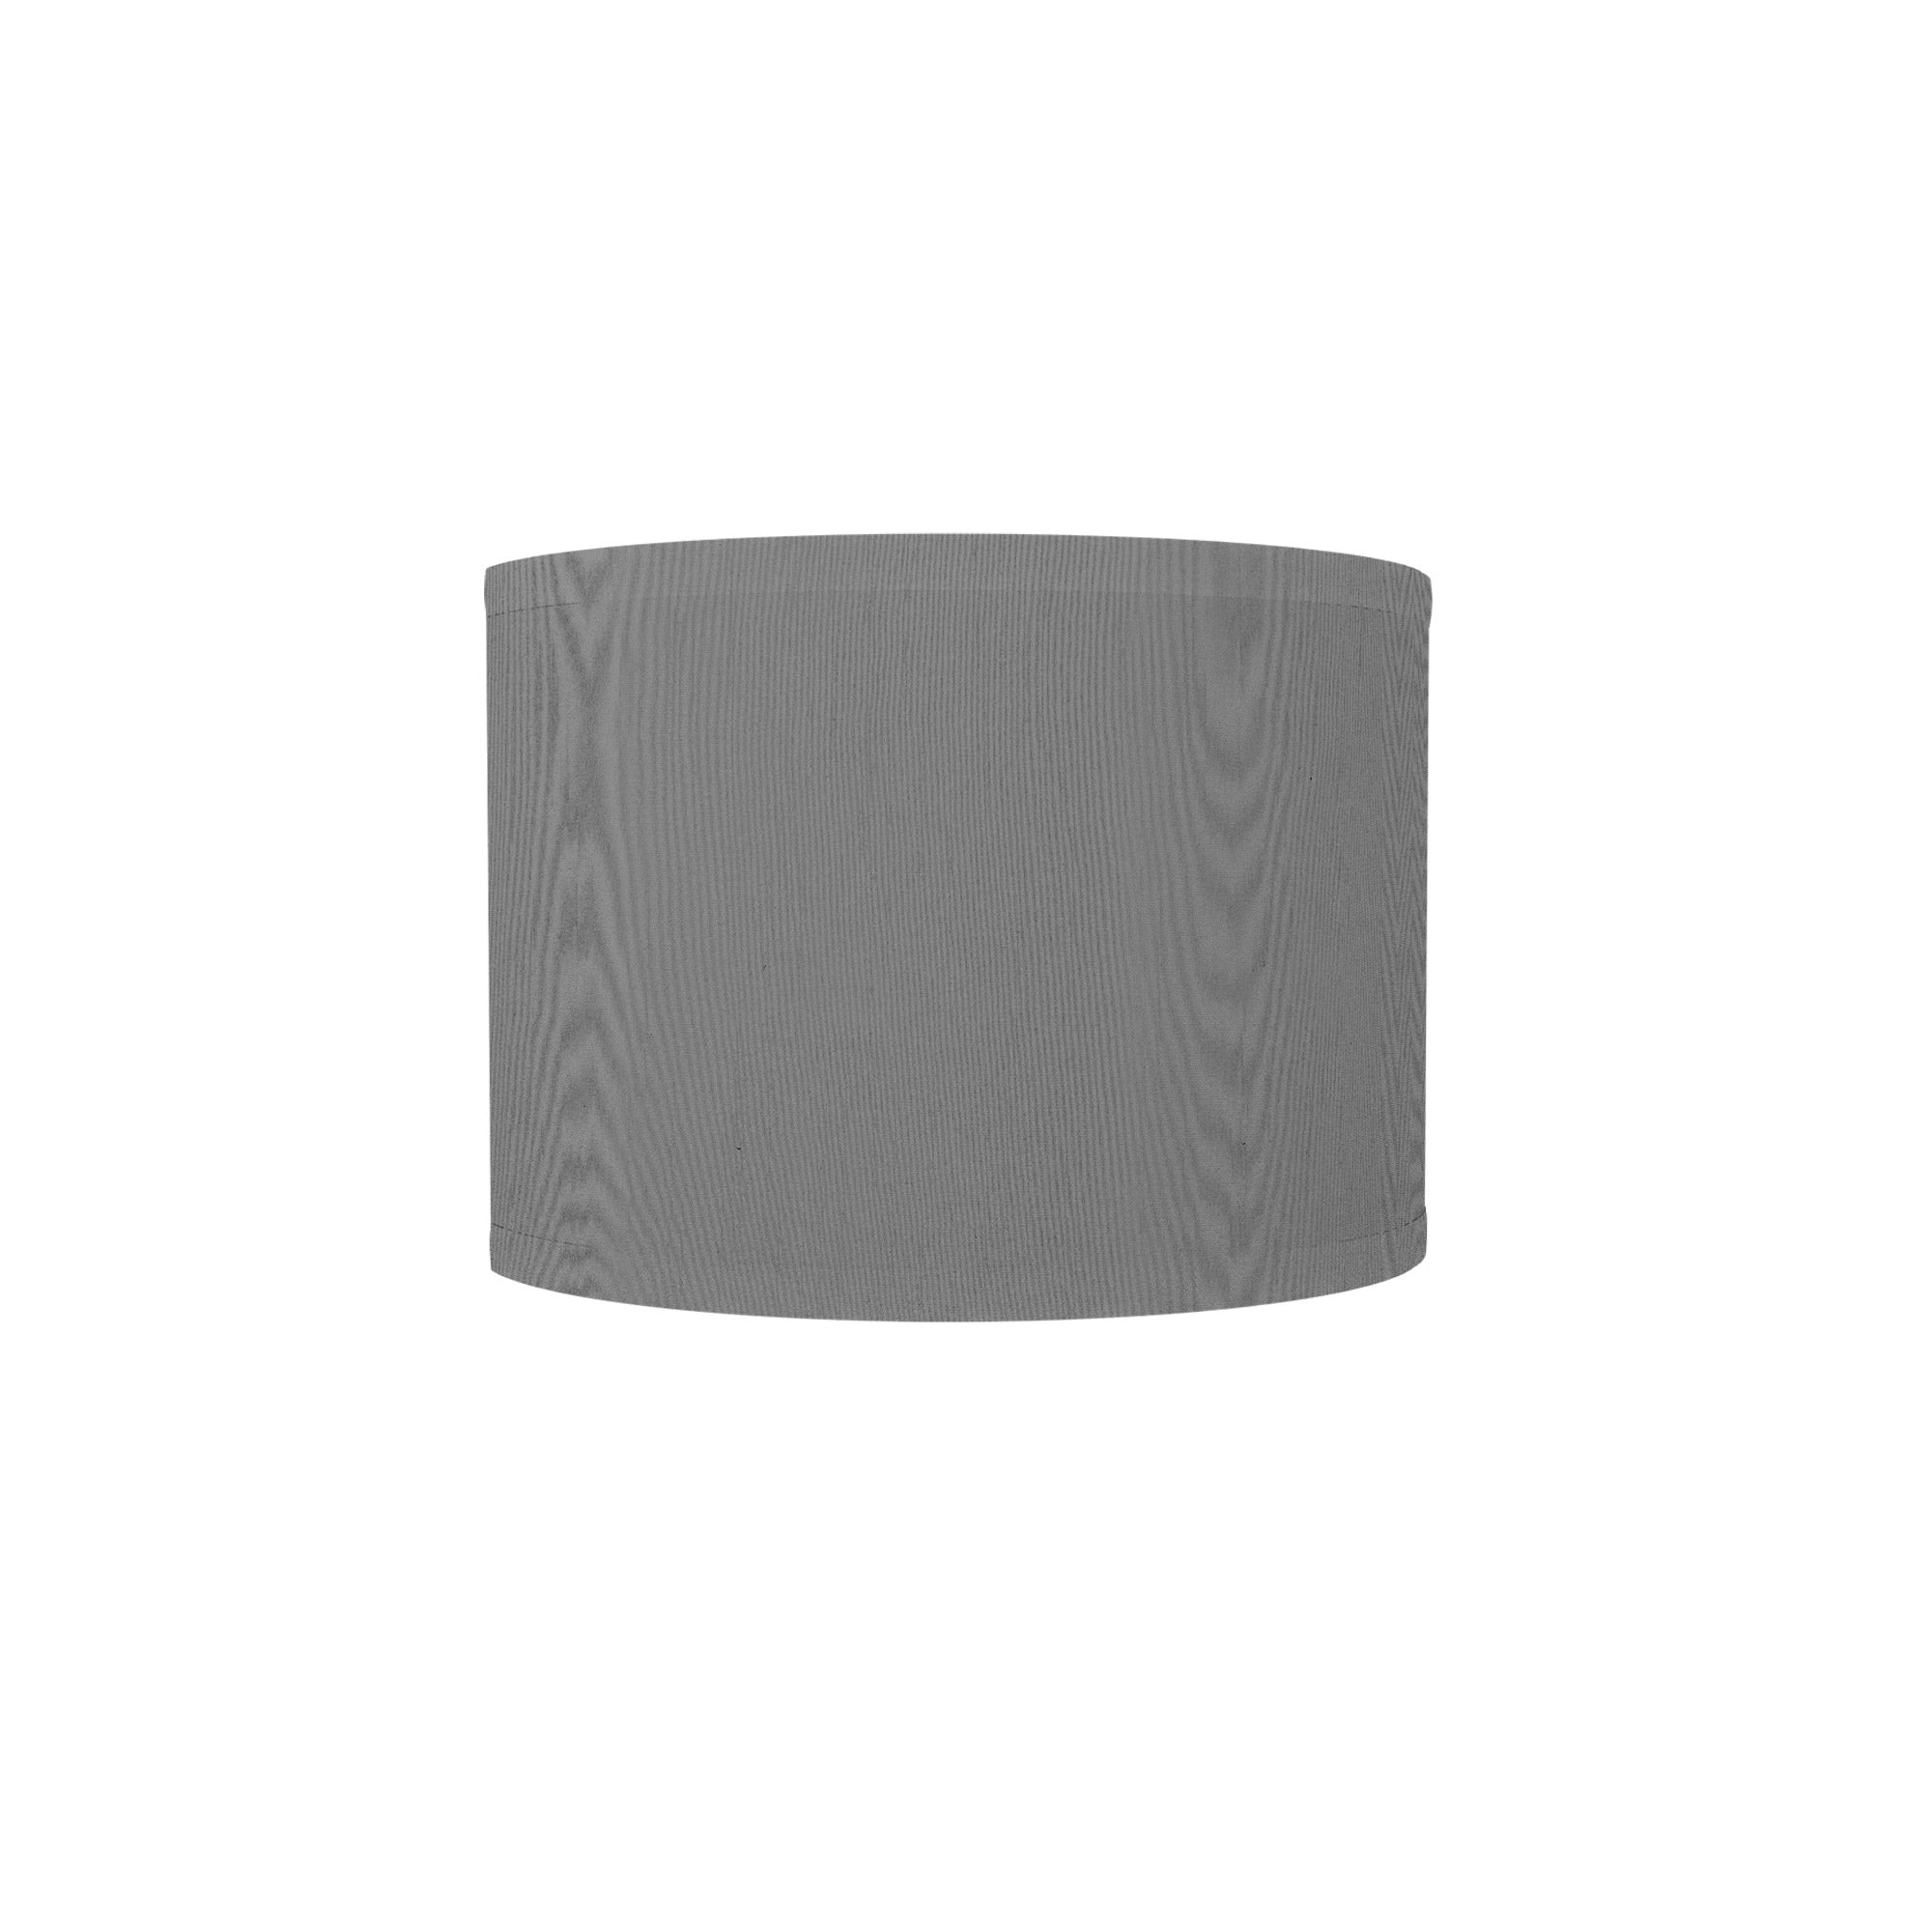 The Bryce Wall Sconce from Seascape Fixtures with a silk shade in gunmetal color.